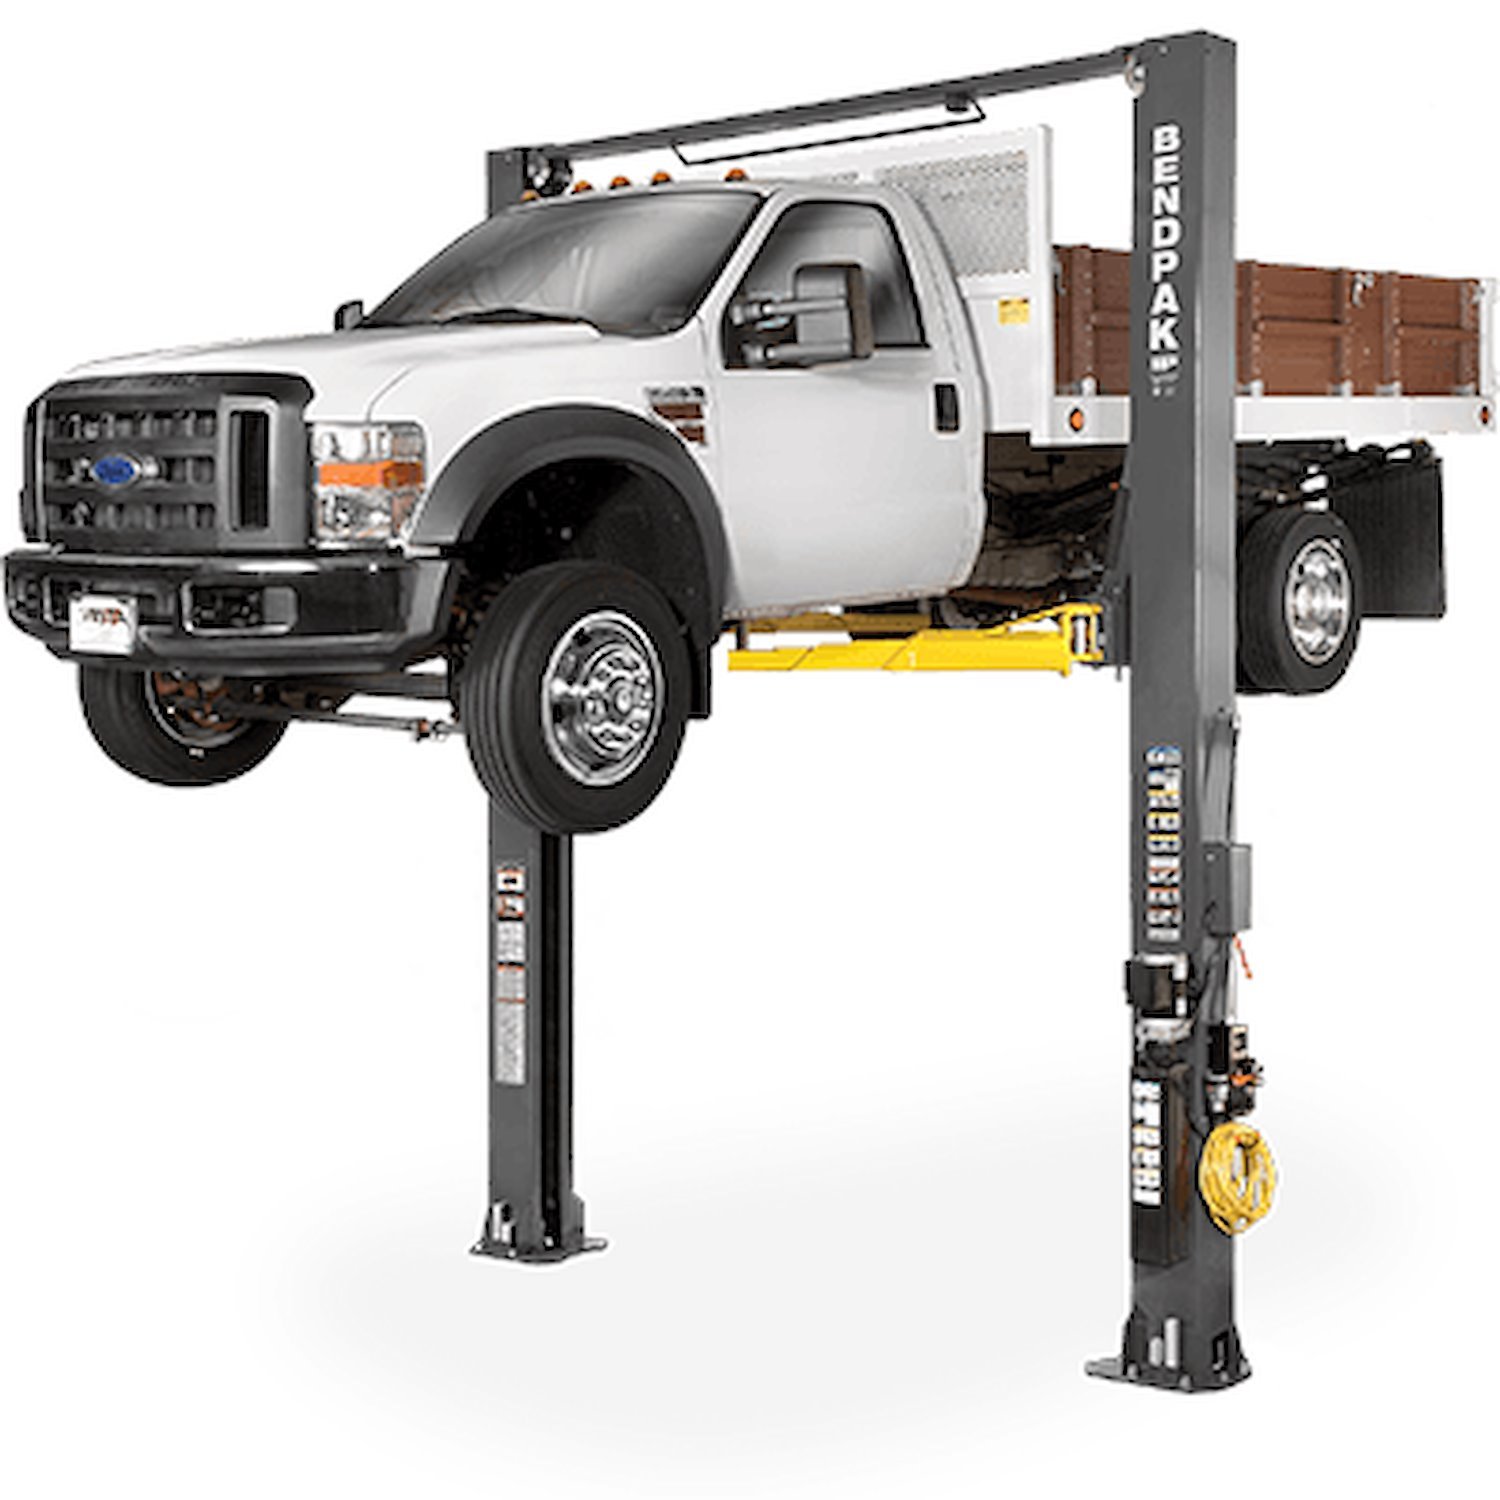 XPR-10XLS Two-Post Lift, Adjustable Width, 10,000 Capacity